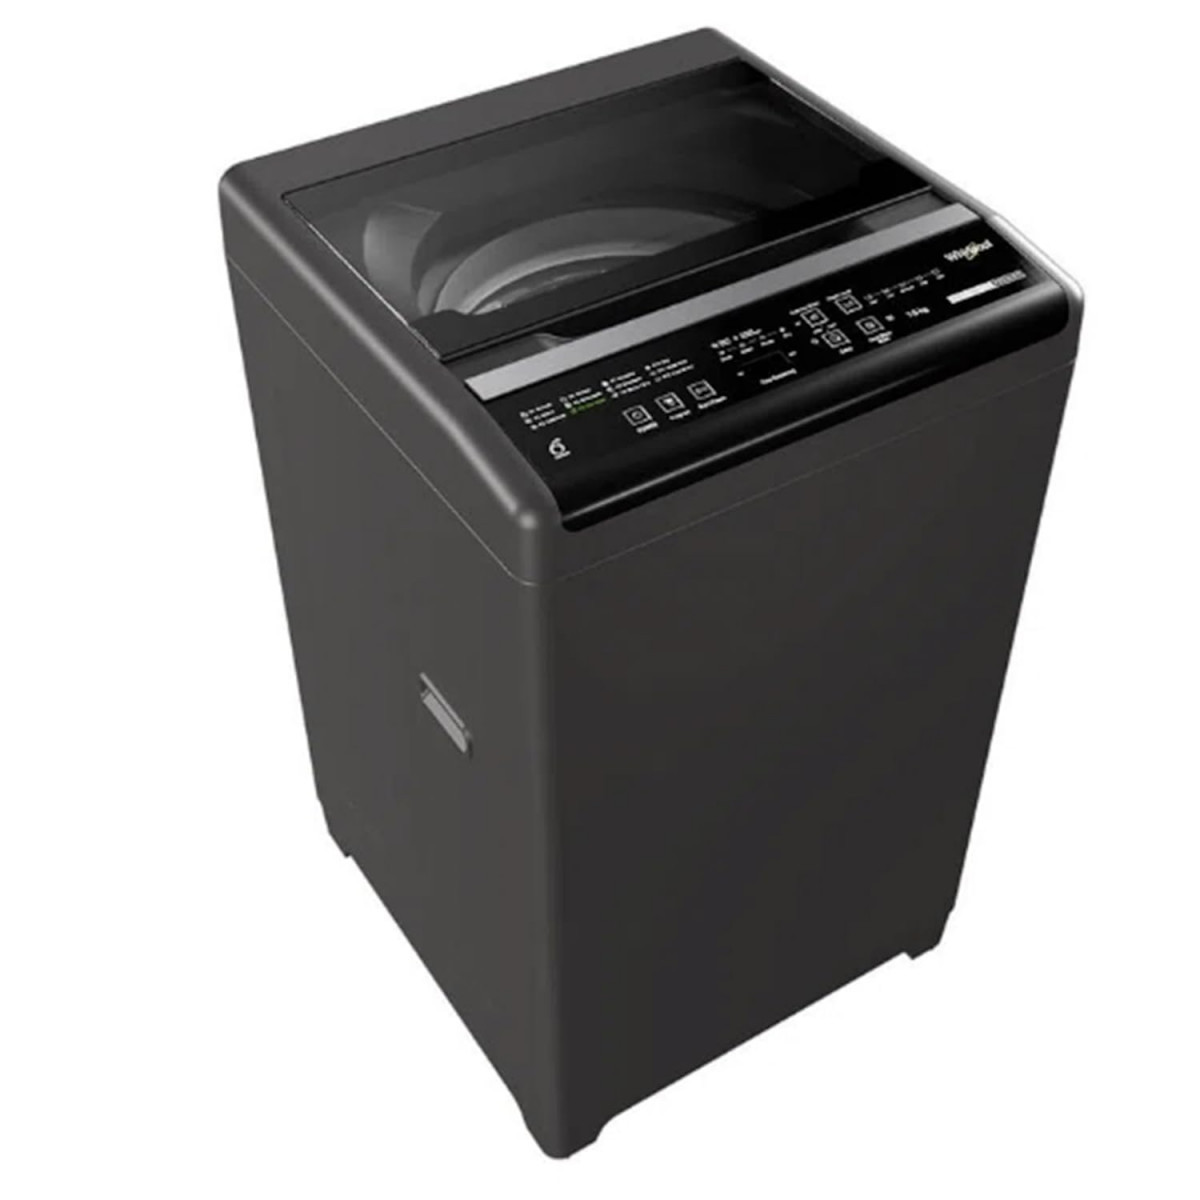 WHIRLPOOL 75 Kg 5 Star In-Built Heater Fully Automatic Top Load Washing MachineWhitemagic Premier GenX 75kg 10YMW GREY